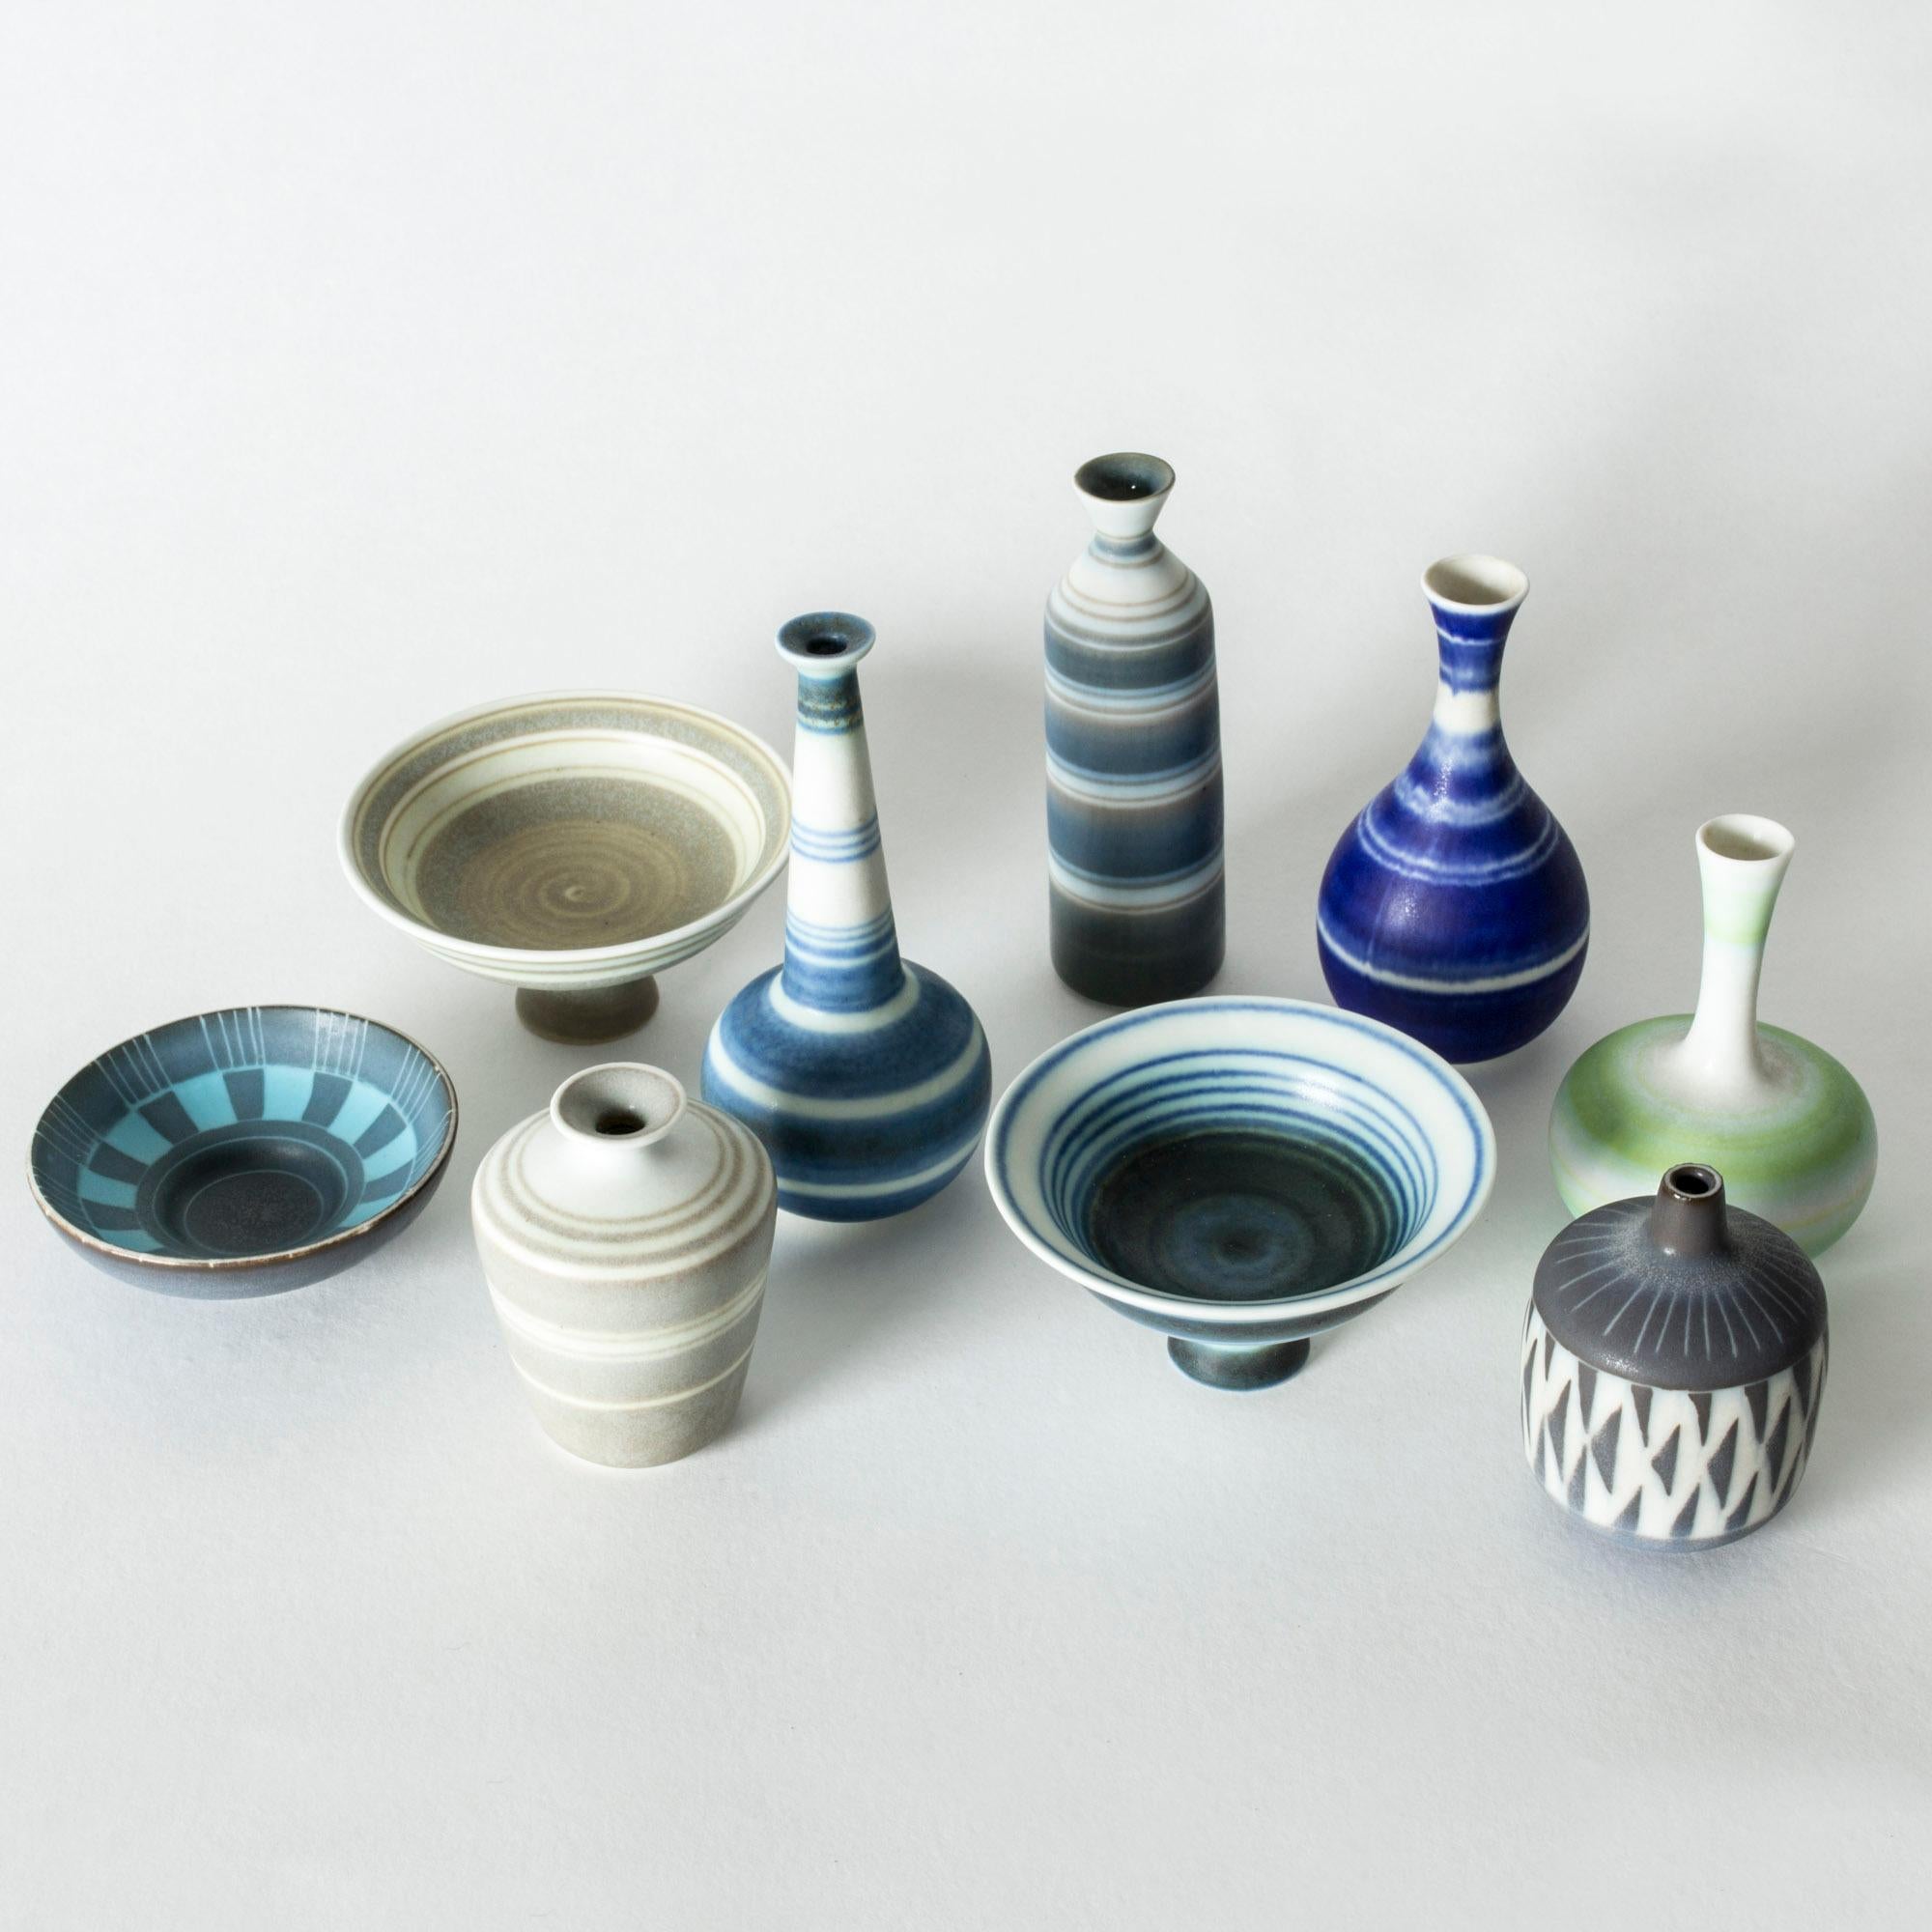 Collection of nine amazing miniature stoneware vases and platters by Gunnar Nylund. Made in matching forms, with a variety of colors and glazes, tied together by a graphic expression. Cool, fun and cute!

Sizes: Height 2.2-11 cm, diameter 3.2-8 cm.